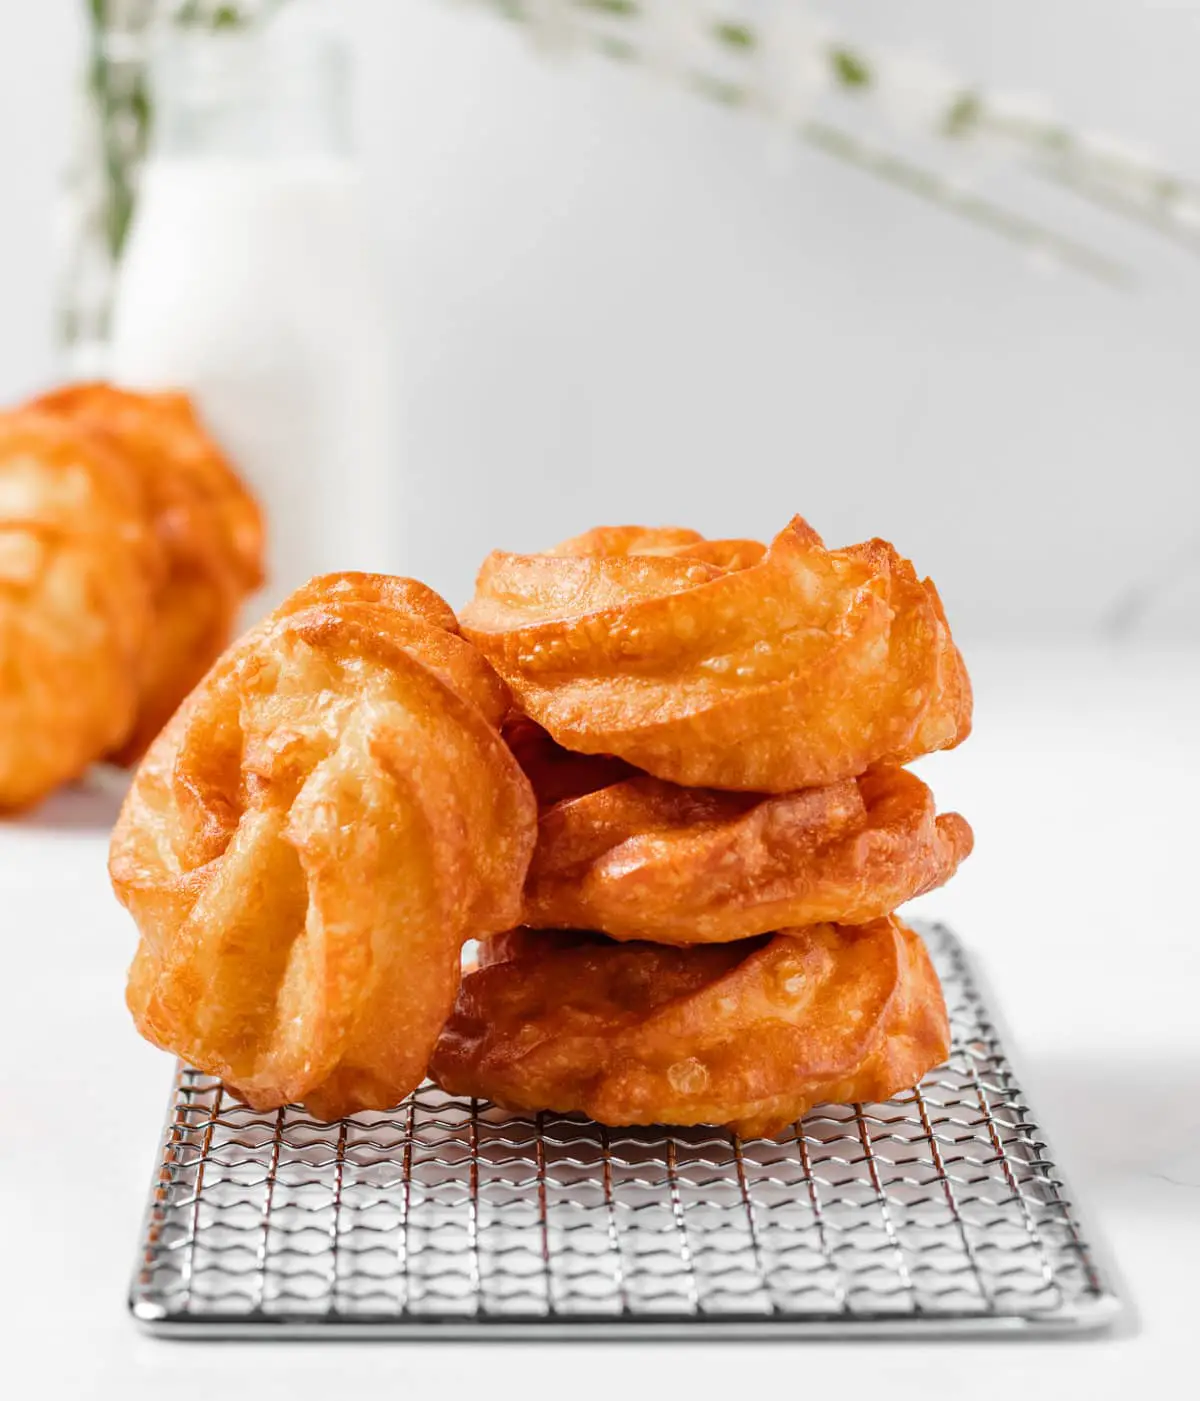 French cruller donuts without glaze